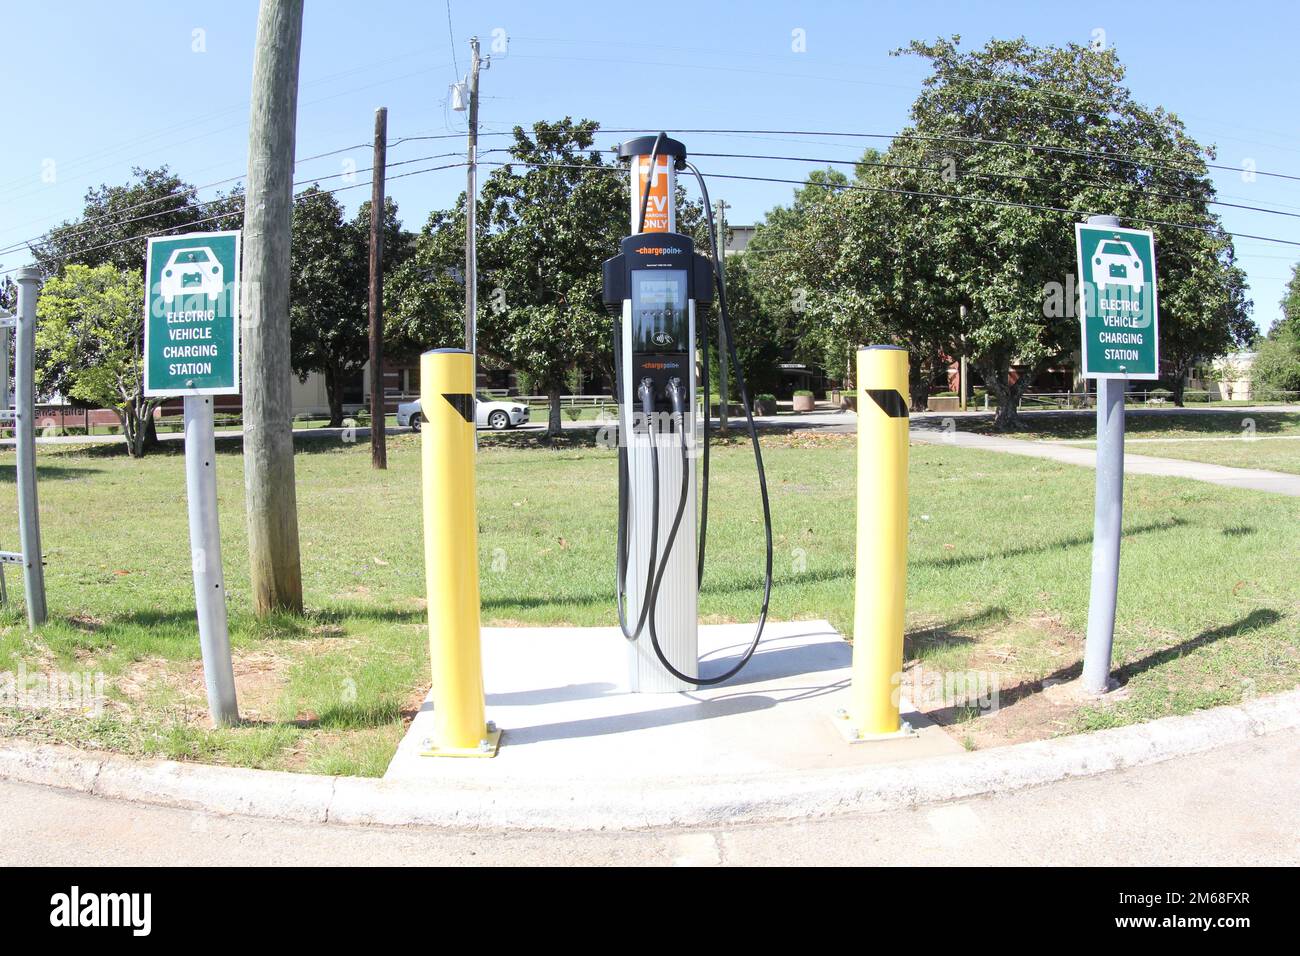 The electric vehicle charging station in front of Bldg. 5700, the Soldier Service Center. Only vehicles receiving the service are allowed to park in the two spaces next to the charger. Stock Photo